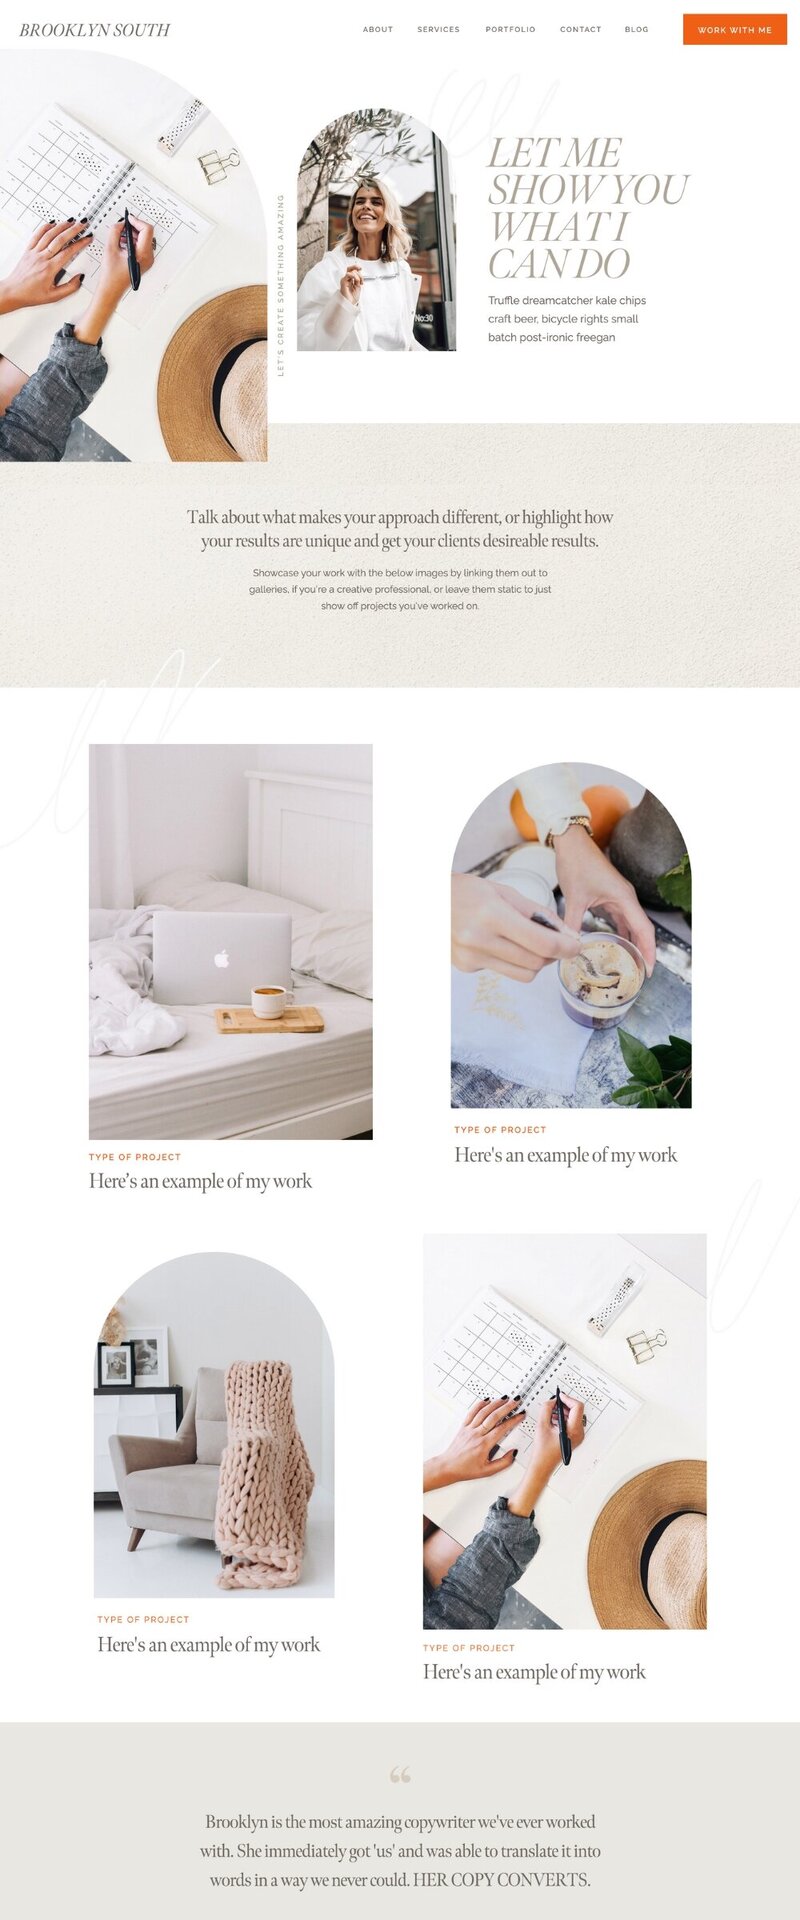 ShowIt Template for Creative Service Providers - Brooklyn South - Portfolio Page